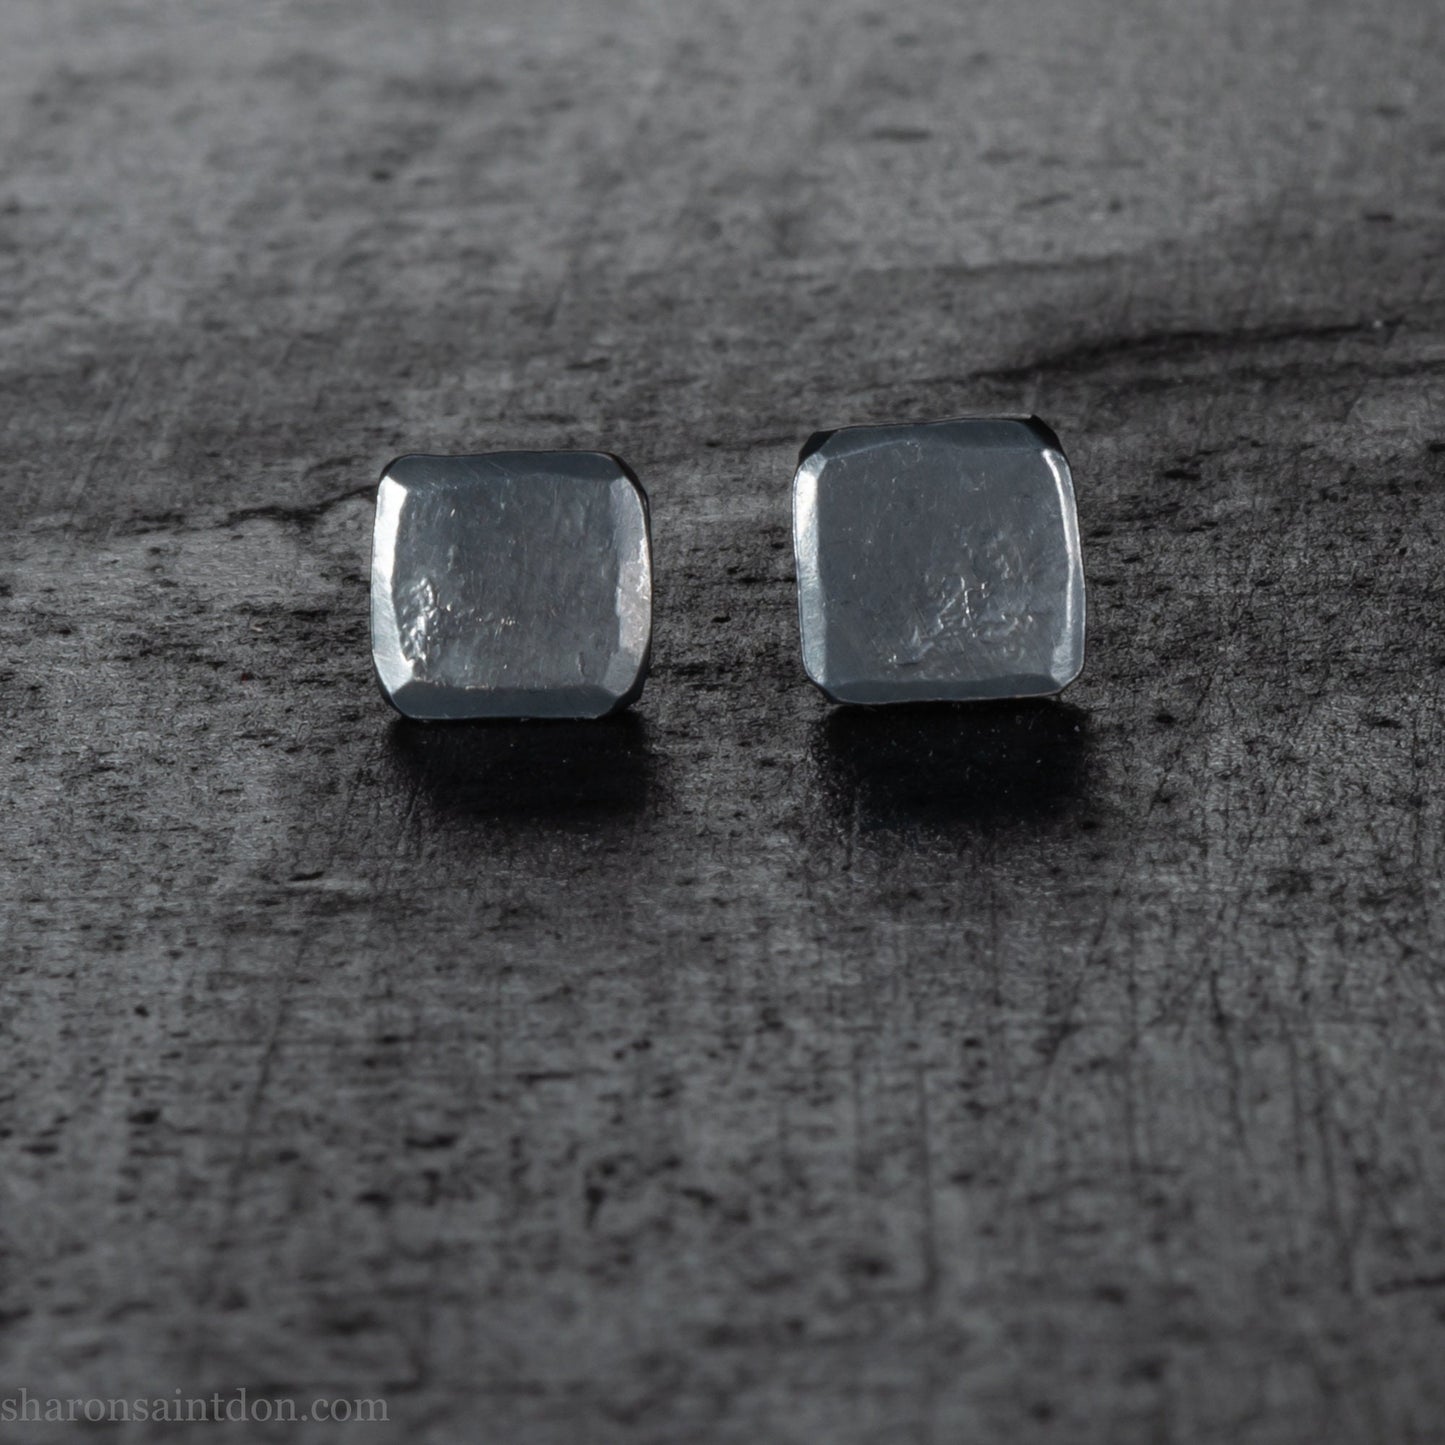 Handmade 925 sterling silver stud earrings.  Small hammered, textured squares. Minimalist, oxidized black stud earrings for men or women made by Sharon SaintDon in North America.